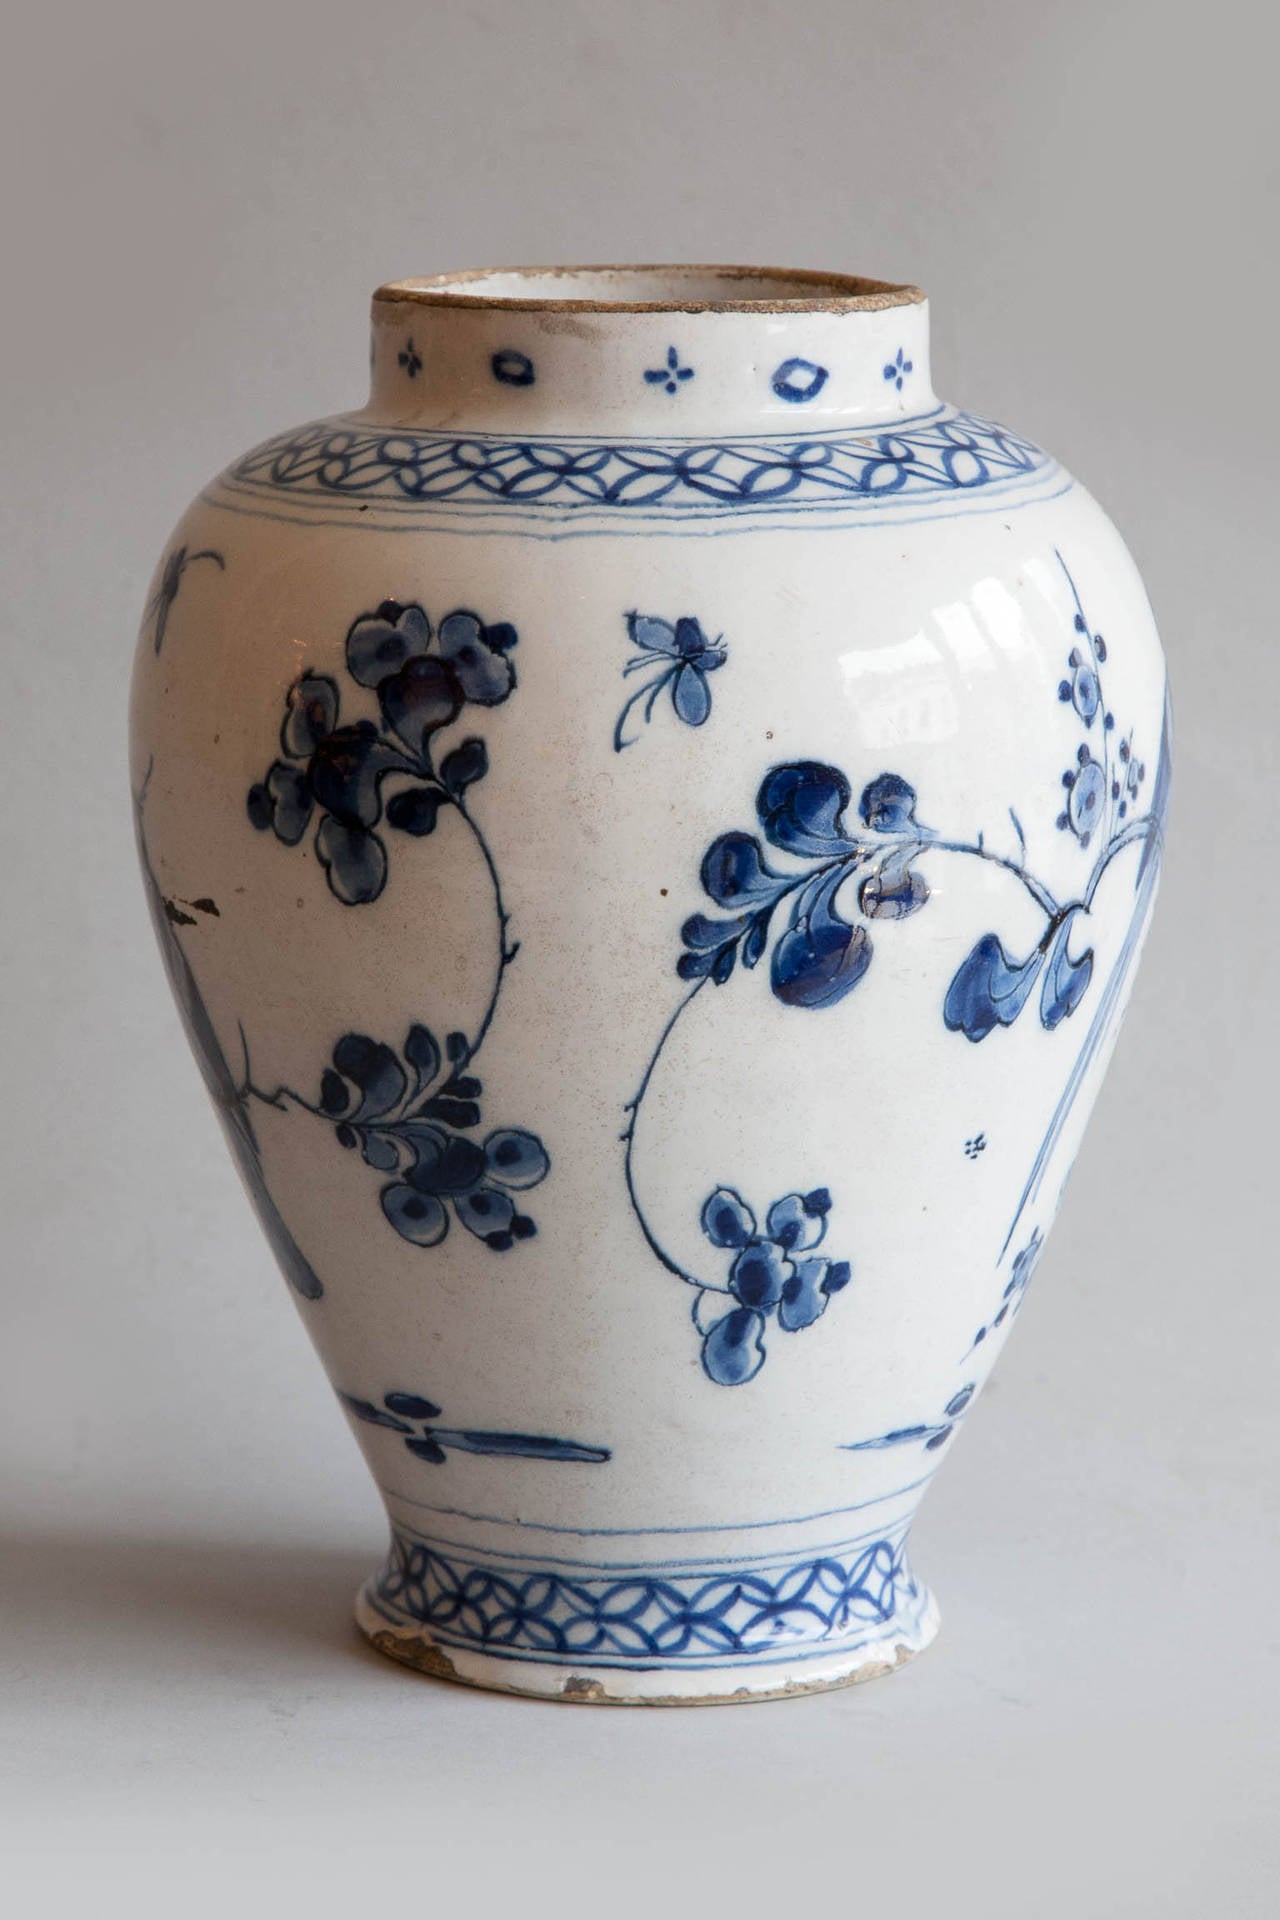 Decorated with birds, flowers and leafy branches in blue and white on a milky white background.
Some chips and old repairs, but in good condition for its age. See photographs for details. This vase is a close pair in size, period and shape to